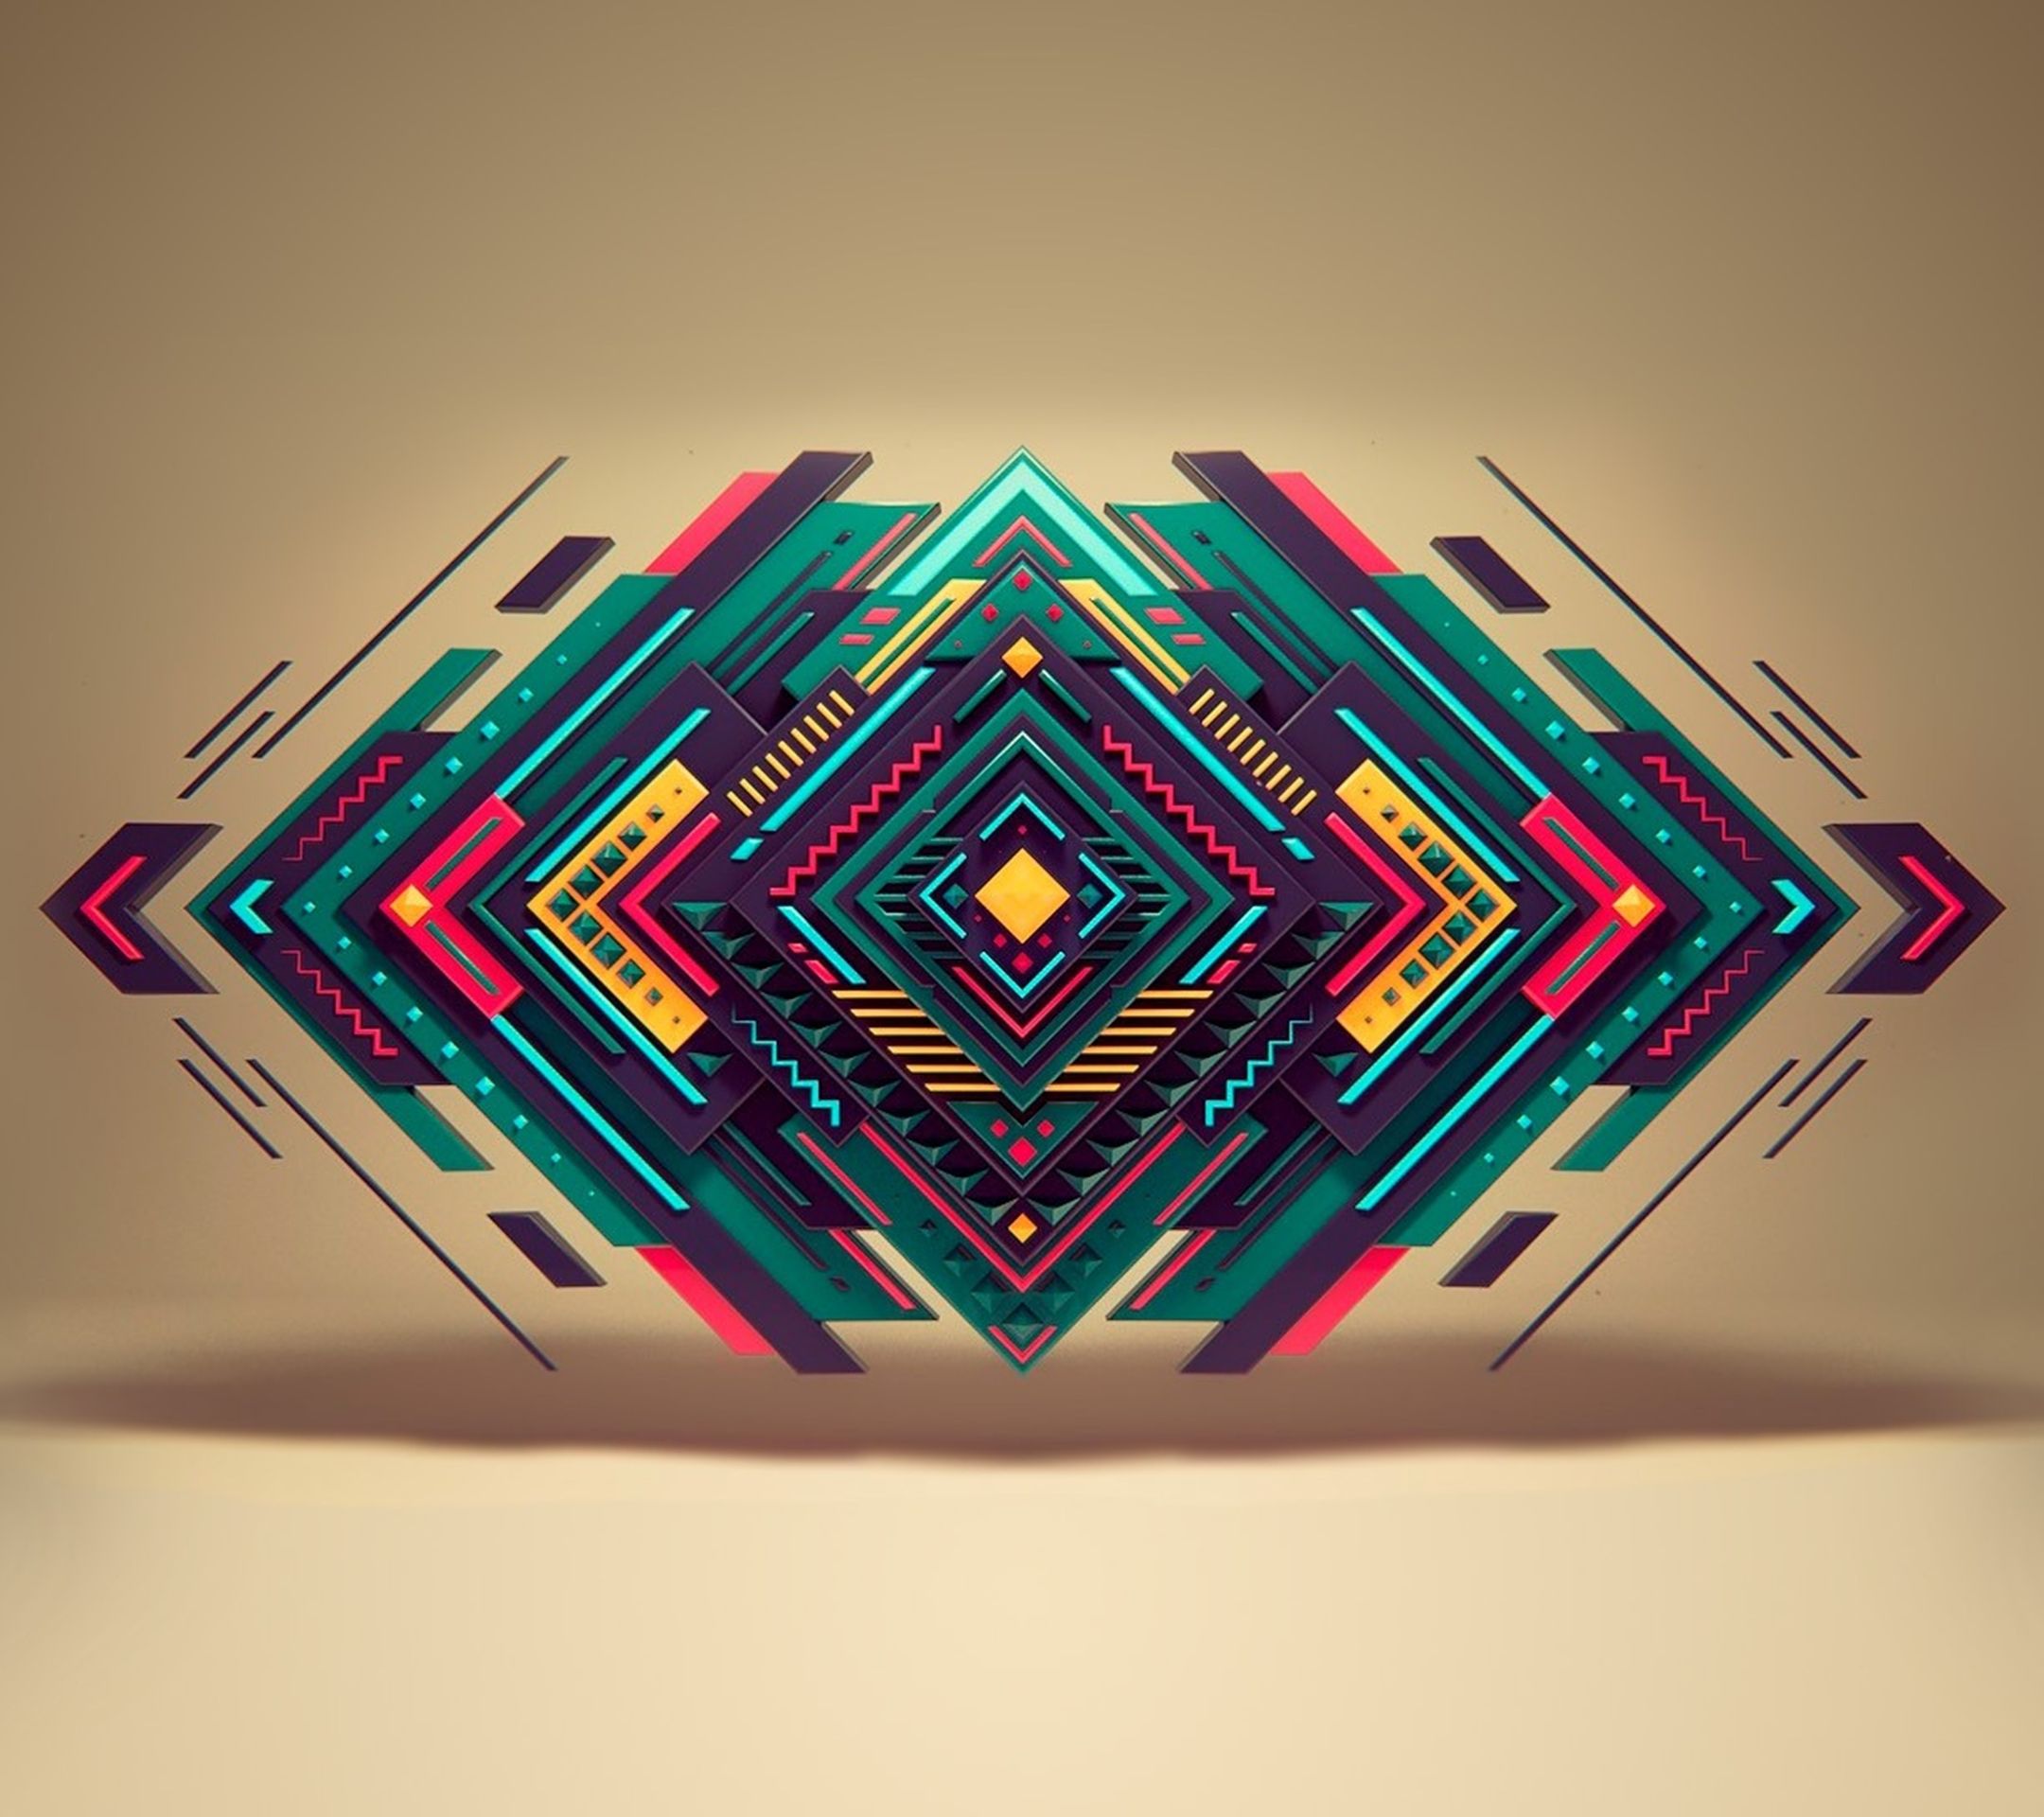 Beautiful 1080p colorful and geometric wallpaper for the Galaxy S5